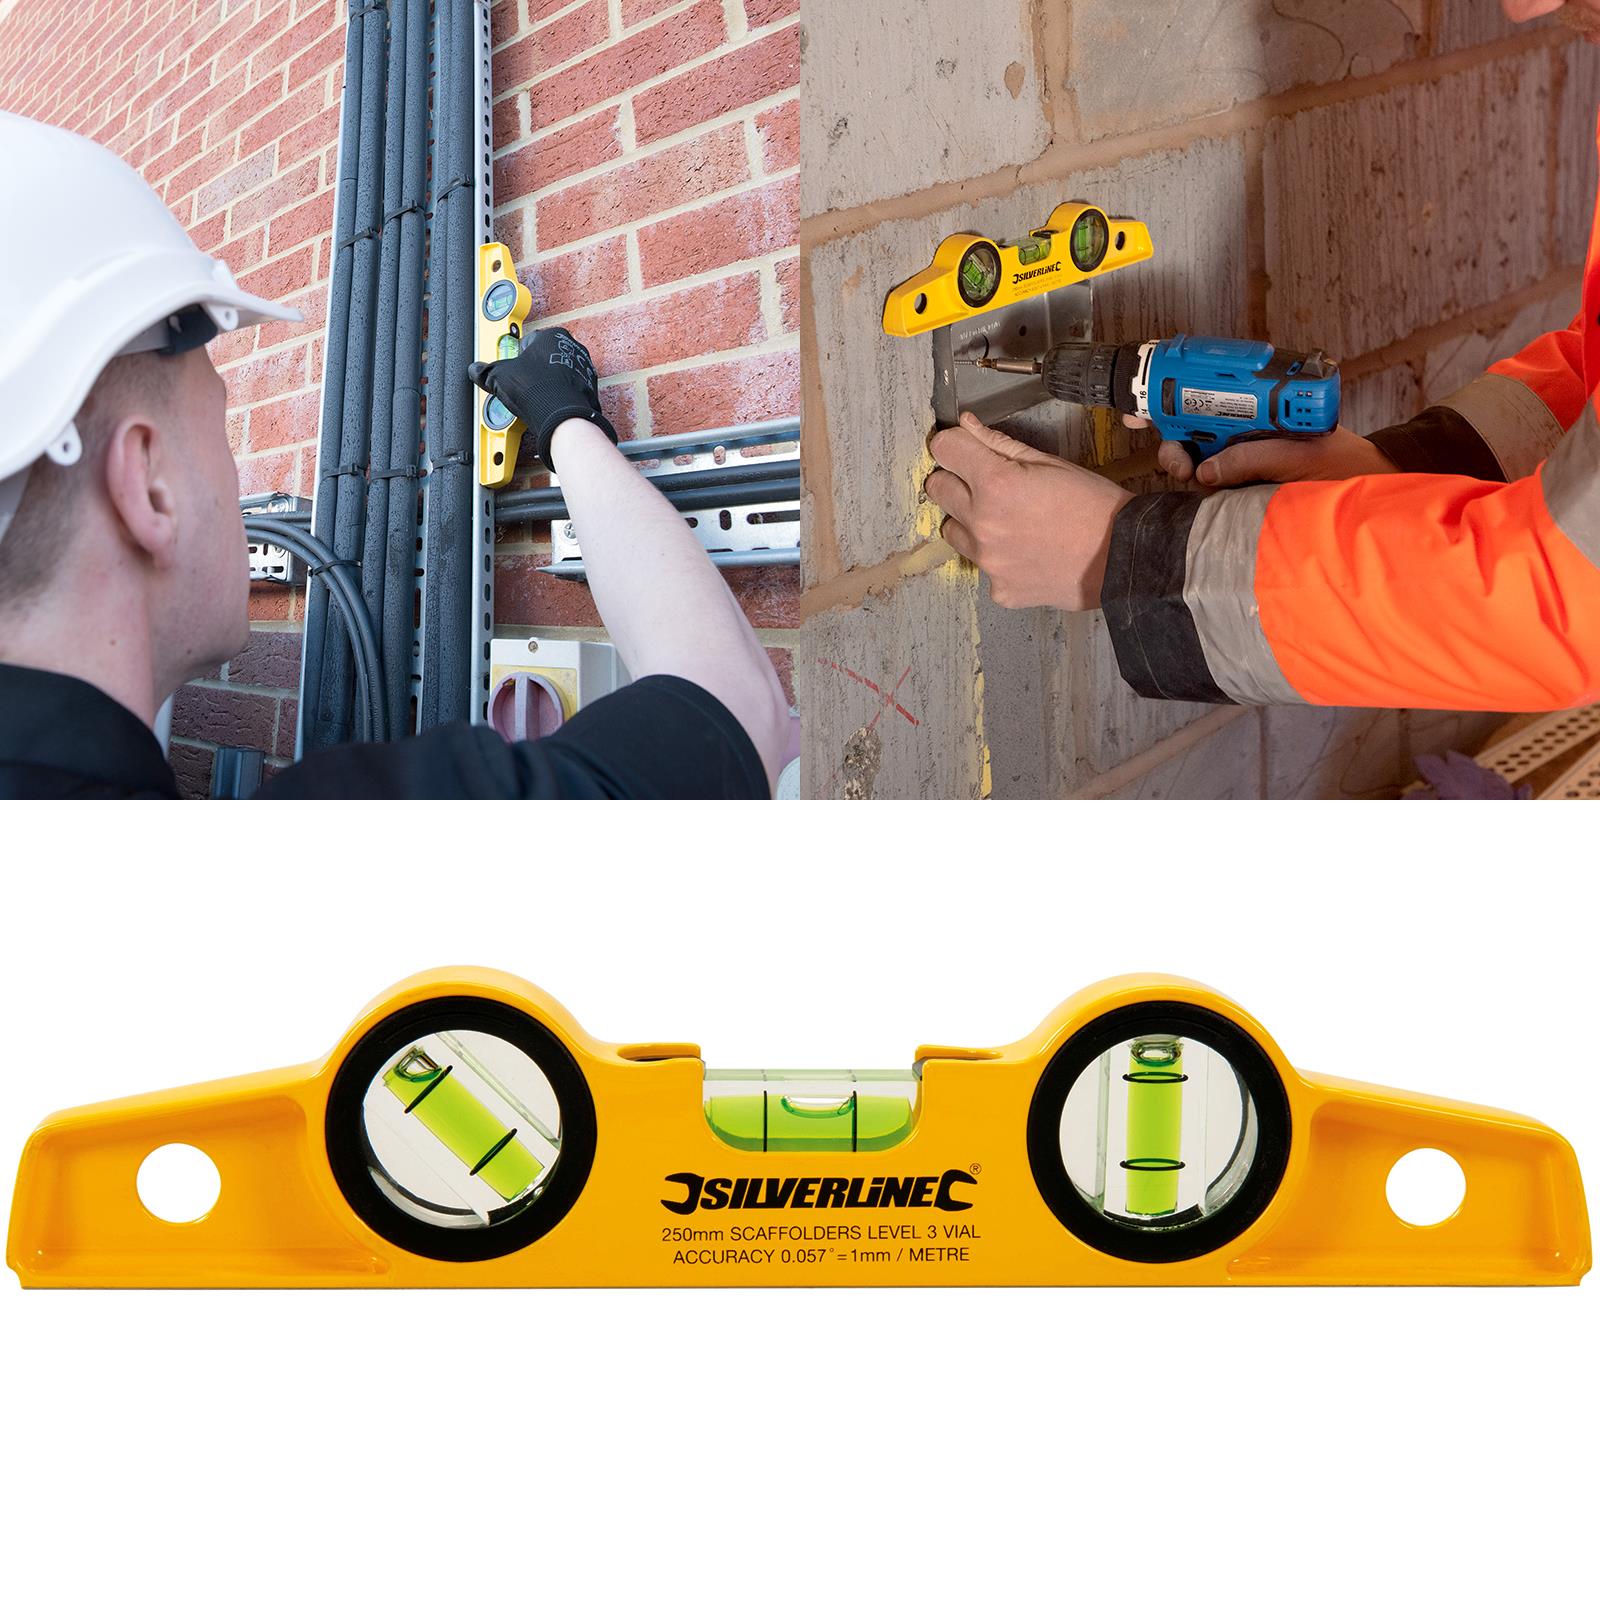 Silverline 250mm Scaffolders Spirit Level with Magnetic Base